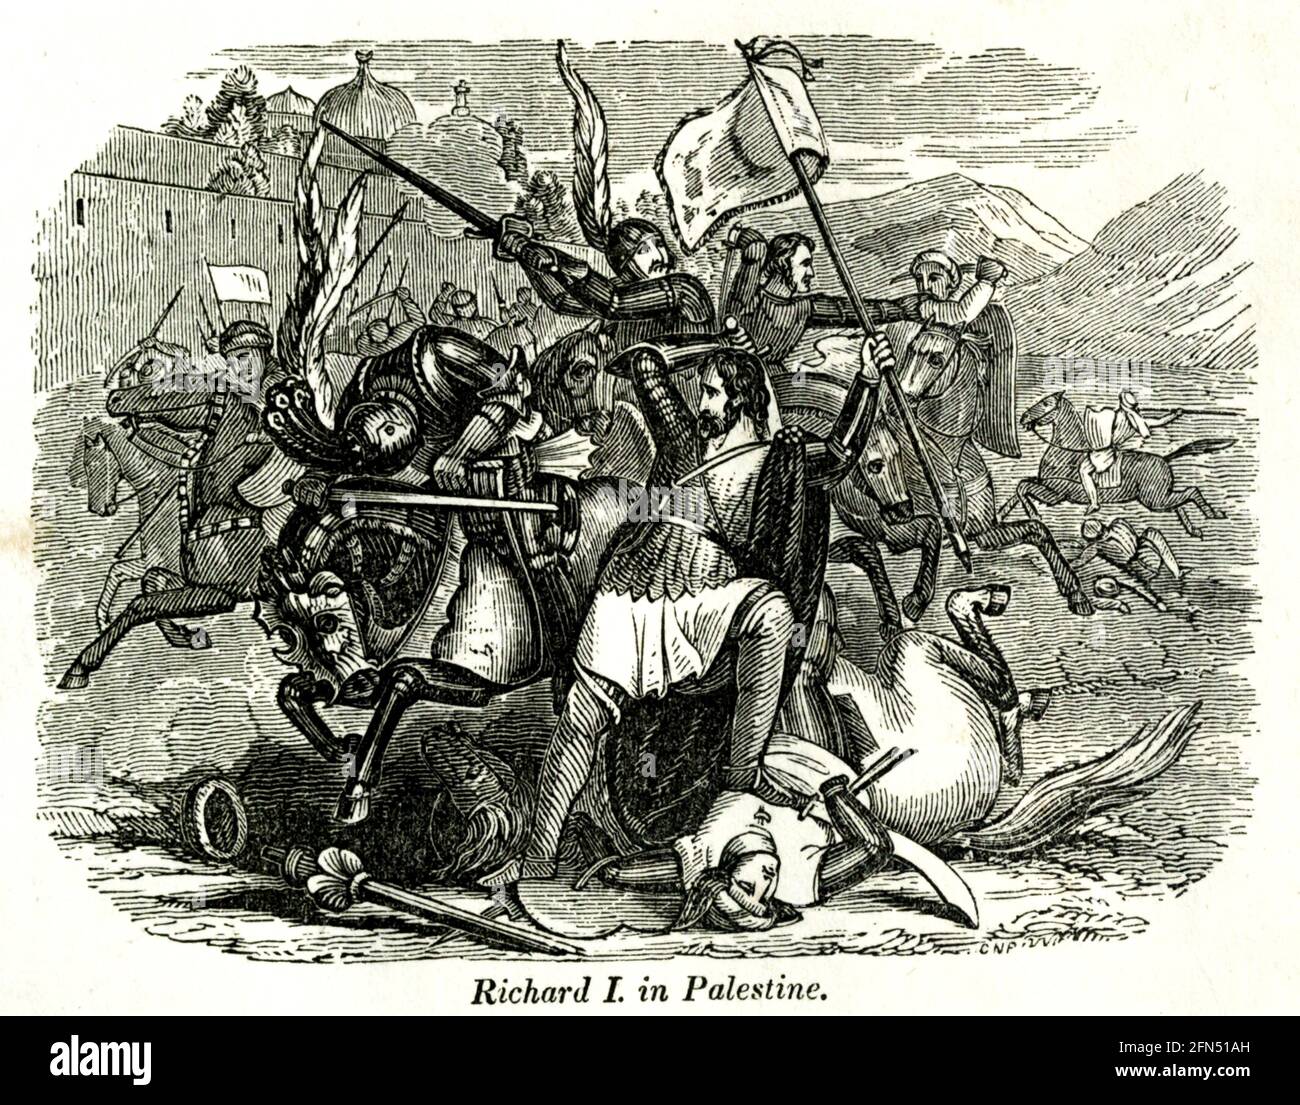 Richard I in Palestine from the book History of England : with separate historical sketches of Scotland, Wales, and Ireland; from the invasion of Julius Cæsar until the accession of Queen Victoria to the British throne. By Russell, John, A. M., Published in Philadelphia by Hogan & Thompso in 1844 Stock Photo